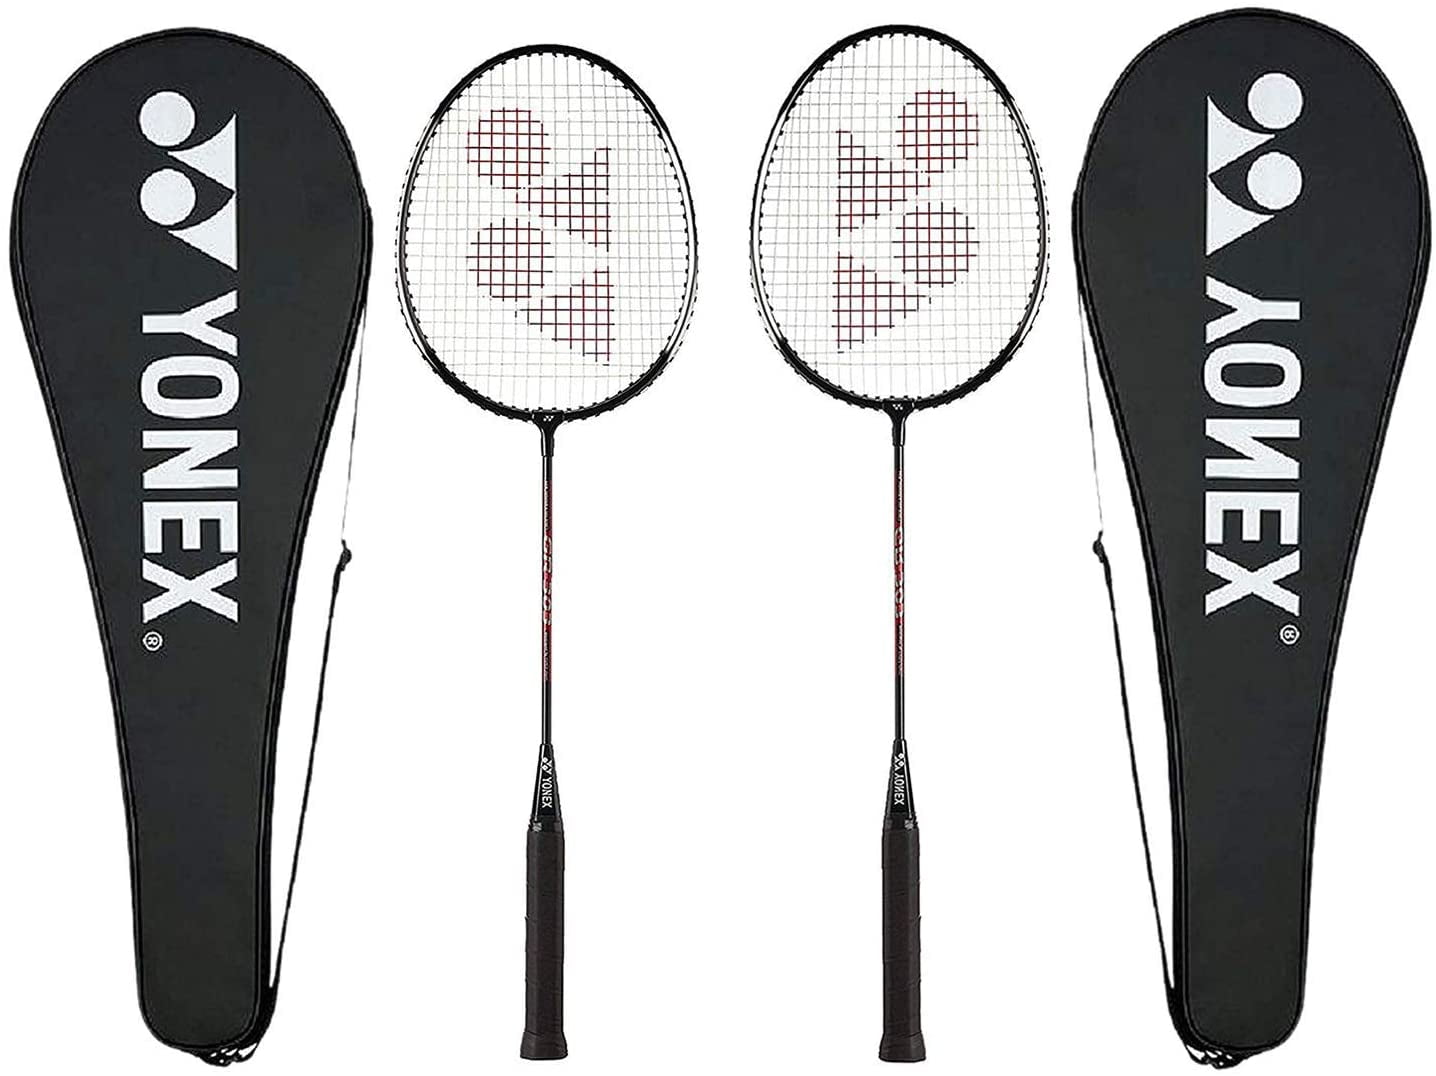 WIOR Badminton Set for Kids with 2 Badminton Rackets and 10 Nylon Shuttlecocks Lightweight & Sturdy Badminton Kit with Carrying Bag Badminton Racquets for Indoor Outdoor Backyards Beach Sports Game